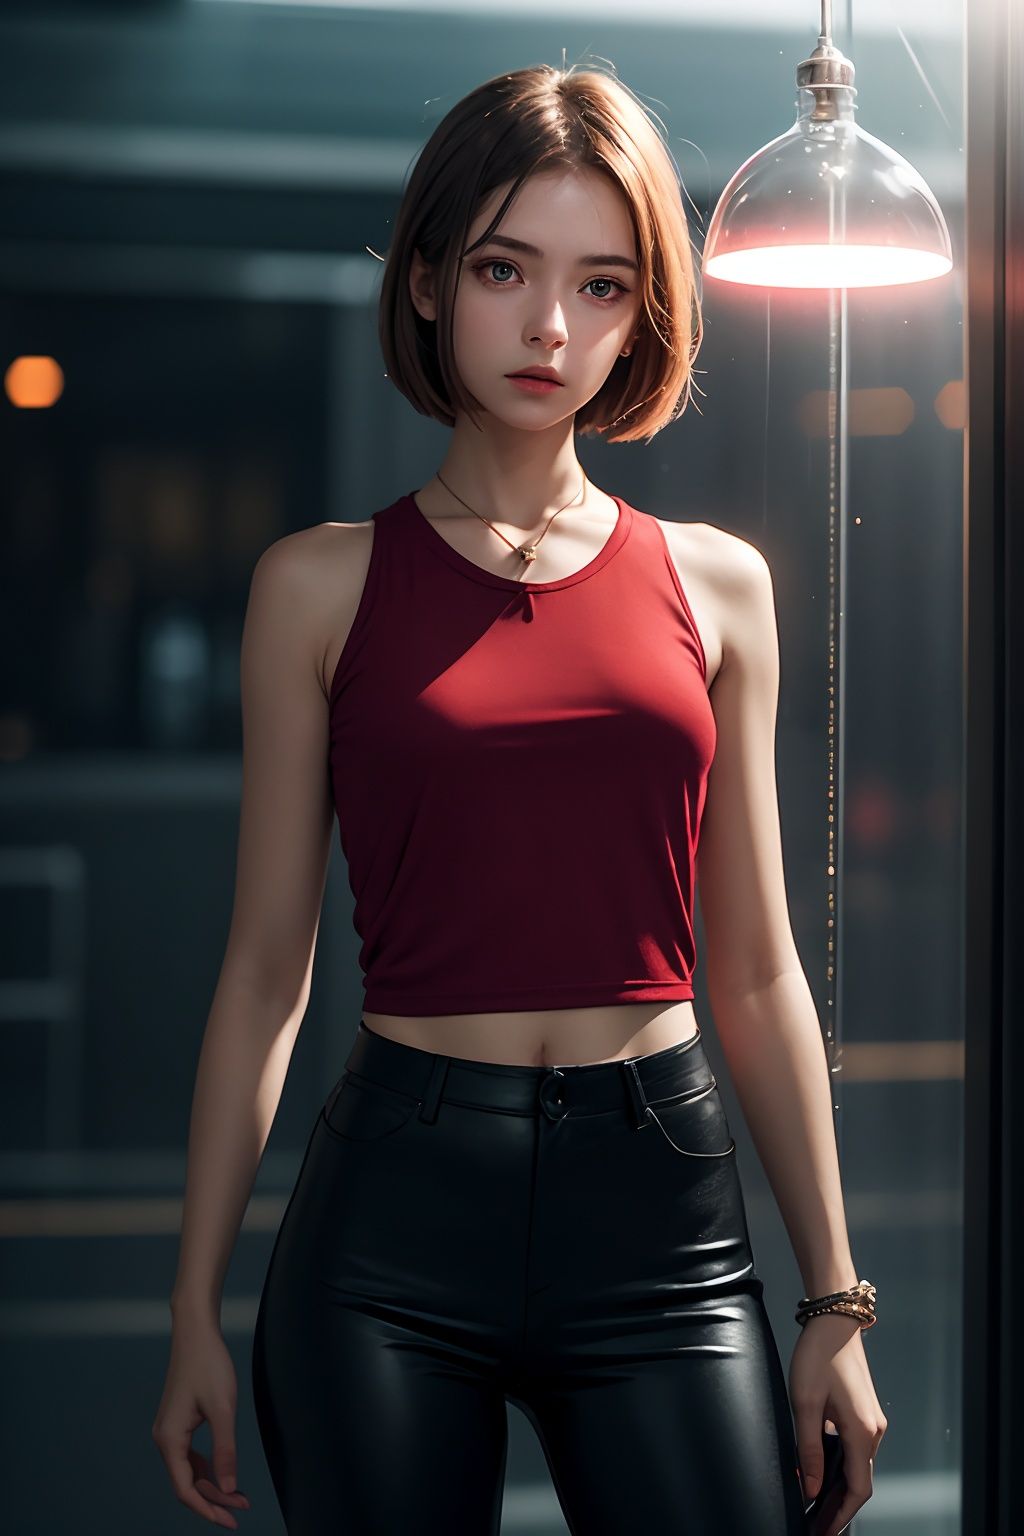 1girl,full_body,highly realistic,glassy translucence,blink-and-you-miss-it detail,Sci-fi light effects,OVERHEAD SPOTLIGHT BEAM,trousers,National wind current,jewelry,bar,glass bottle,(((red top))),